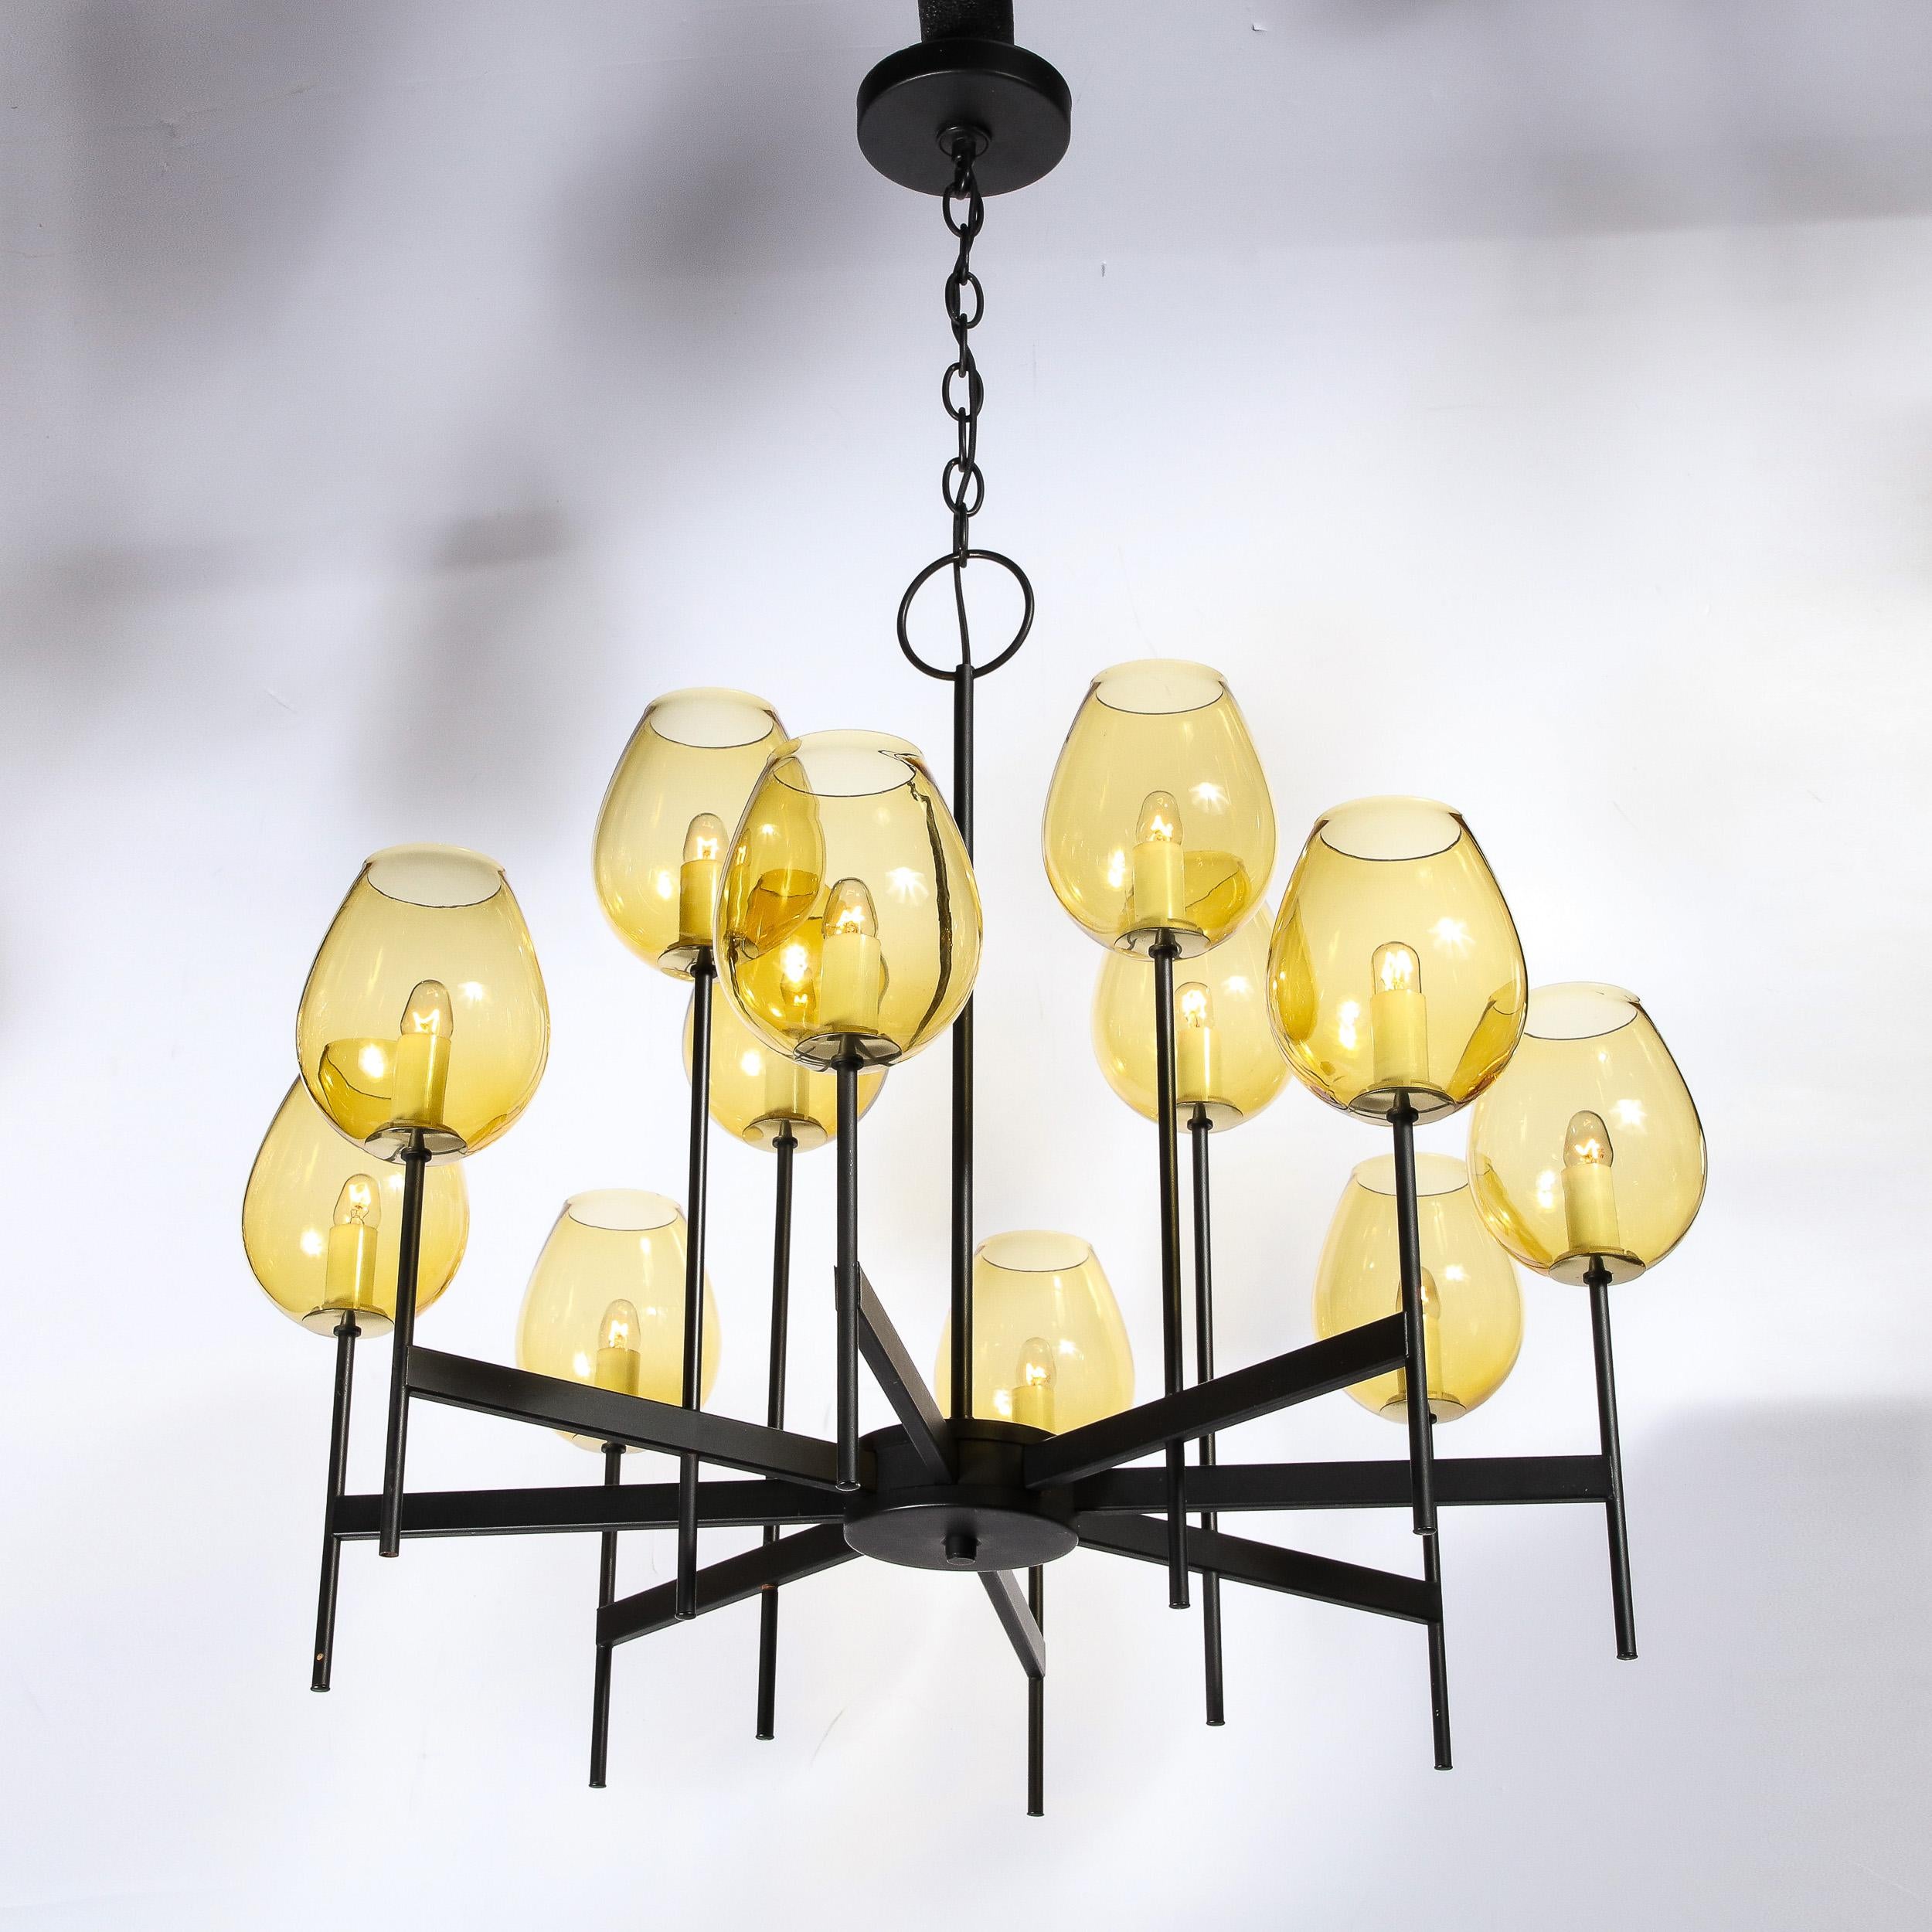 Mid-Century Modernist Eight Arm Smoked Citrine Glass Chandelier by Lightolier In Excellent Condition For Sale In New York, NY